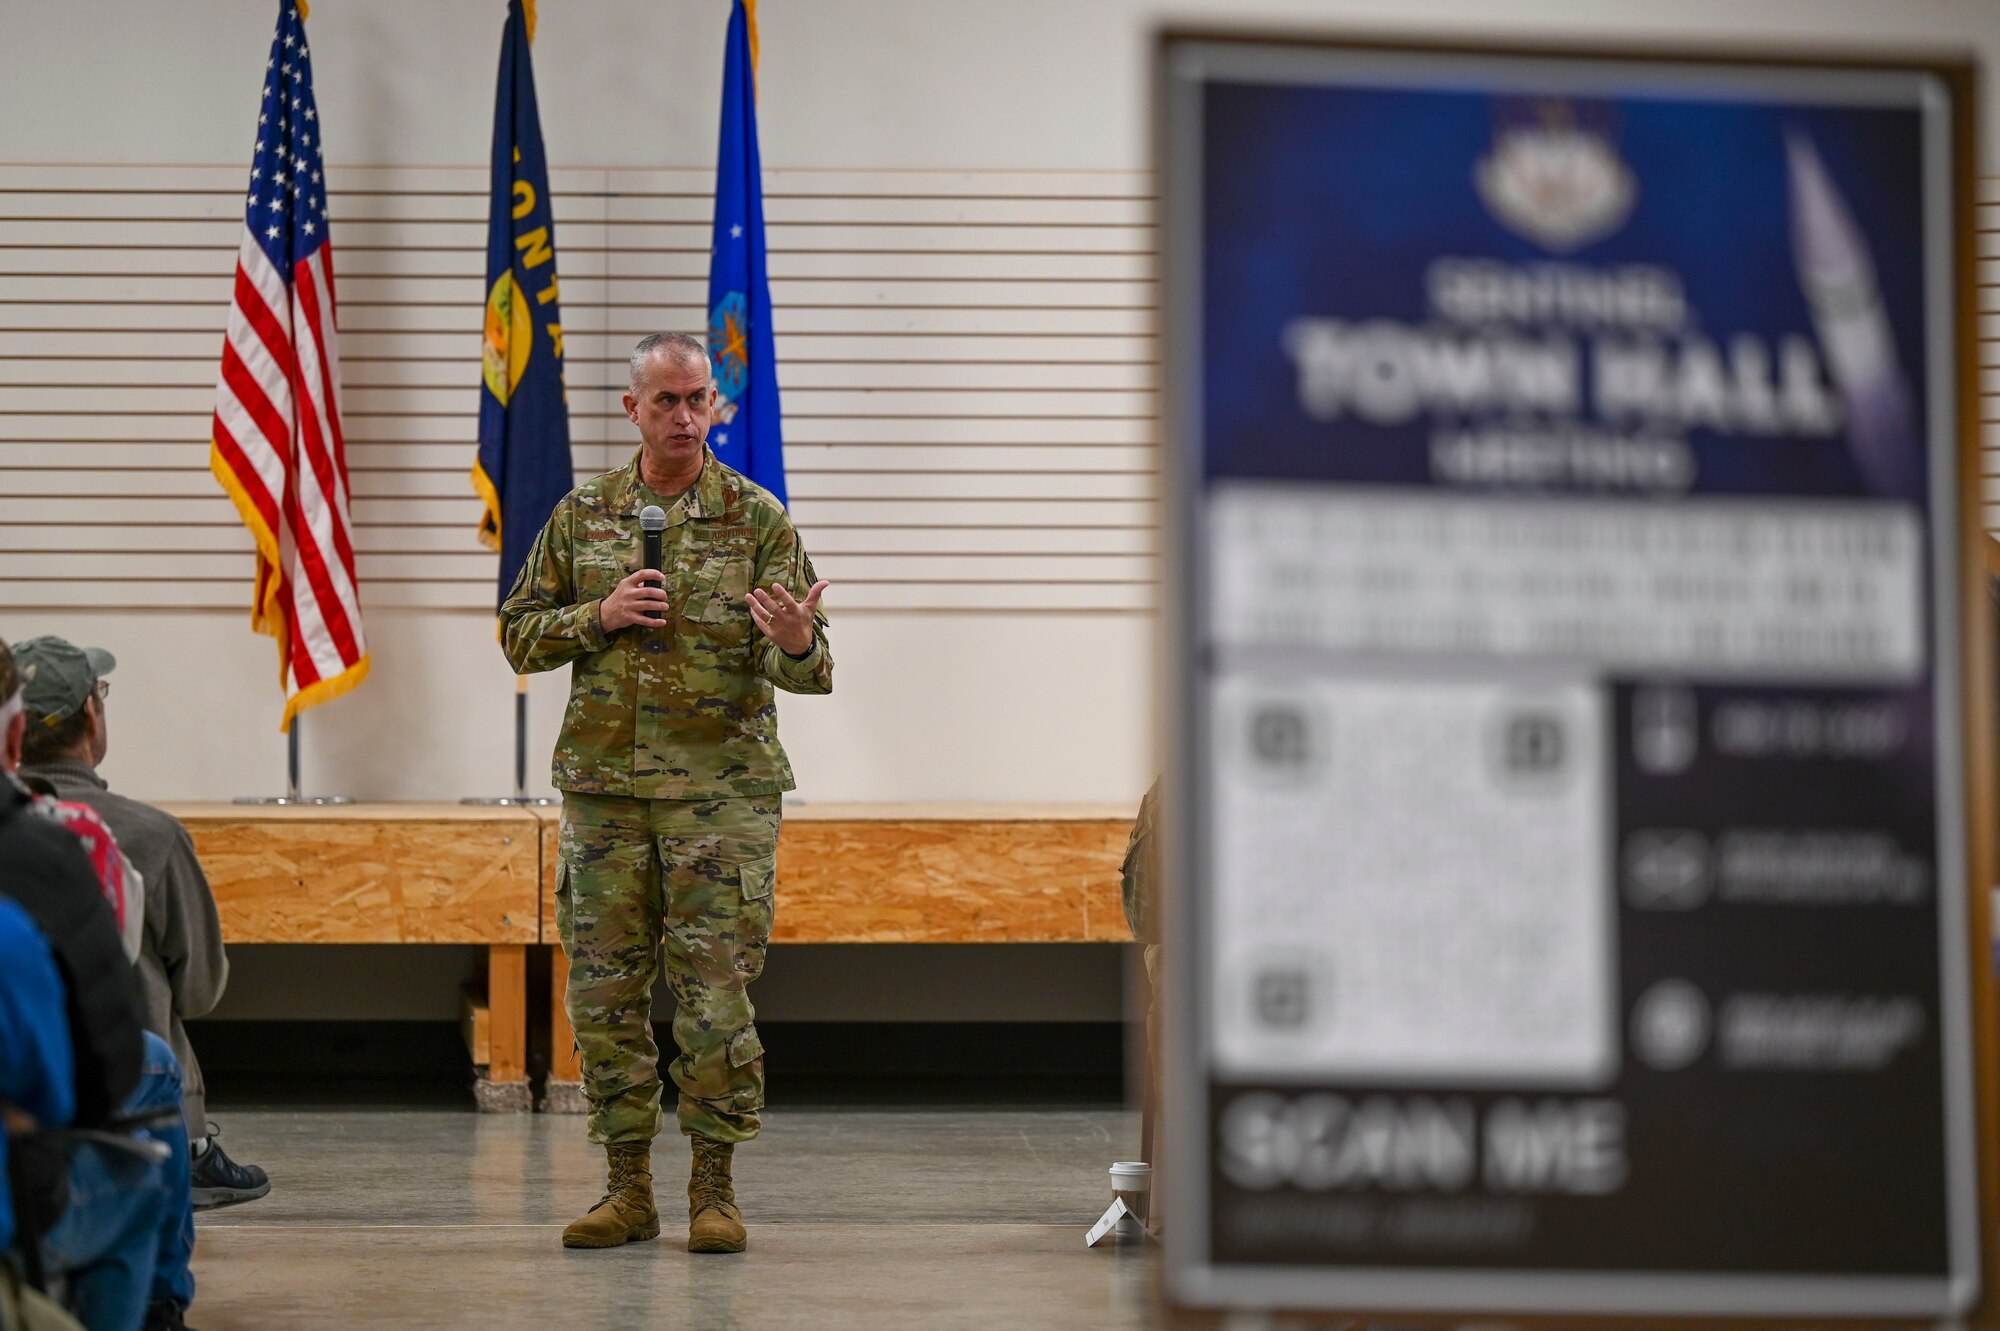 A man speaks to an audience with a sign blurred out on the right of the photo.